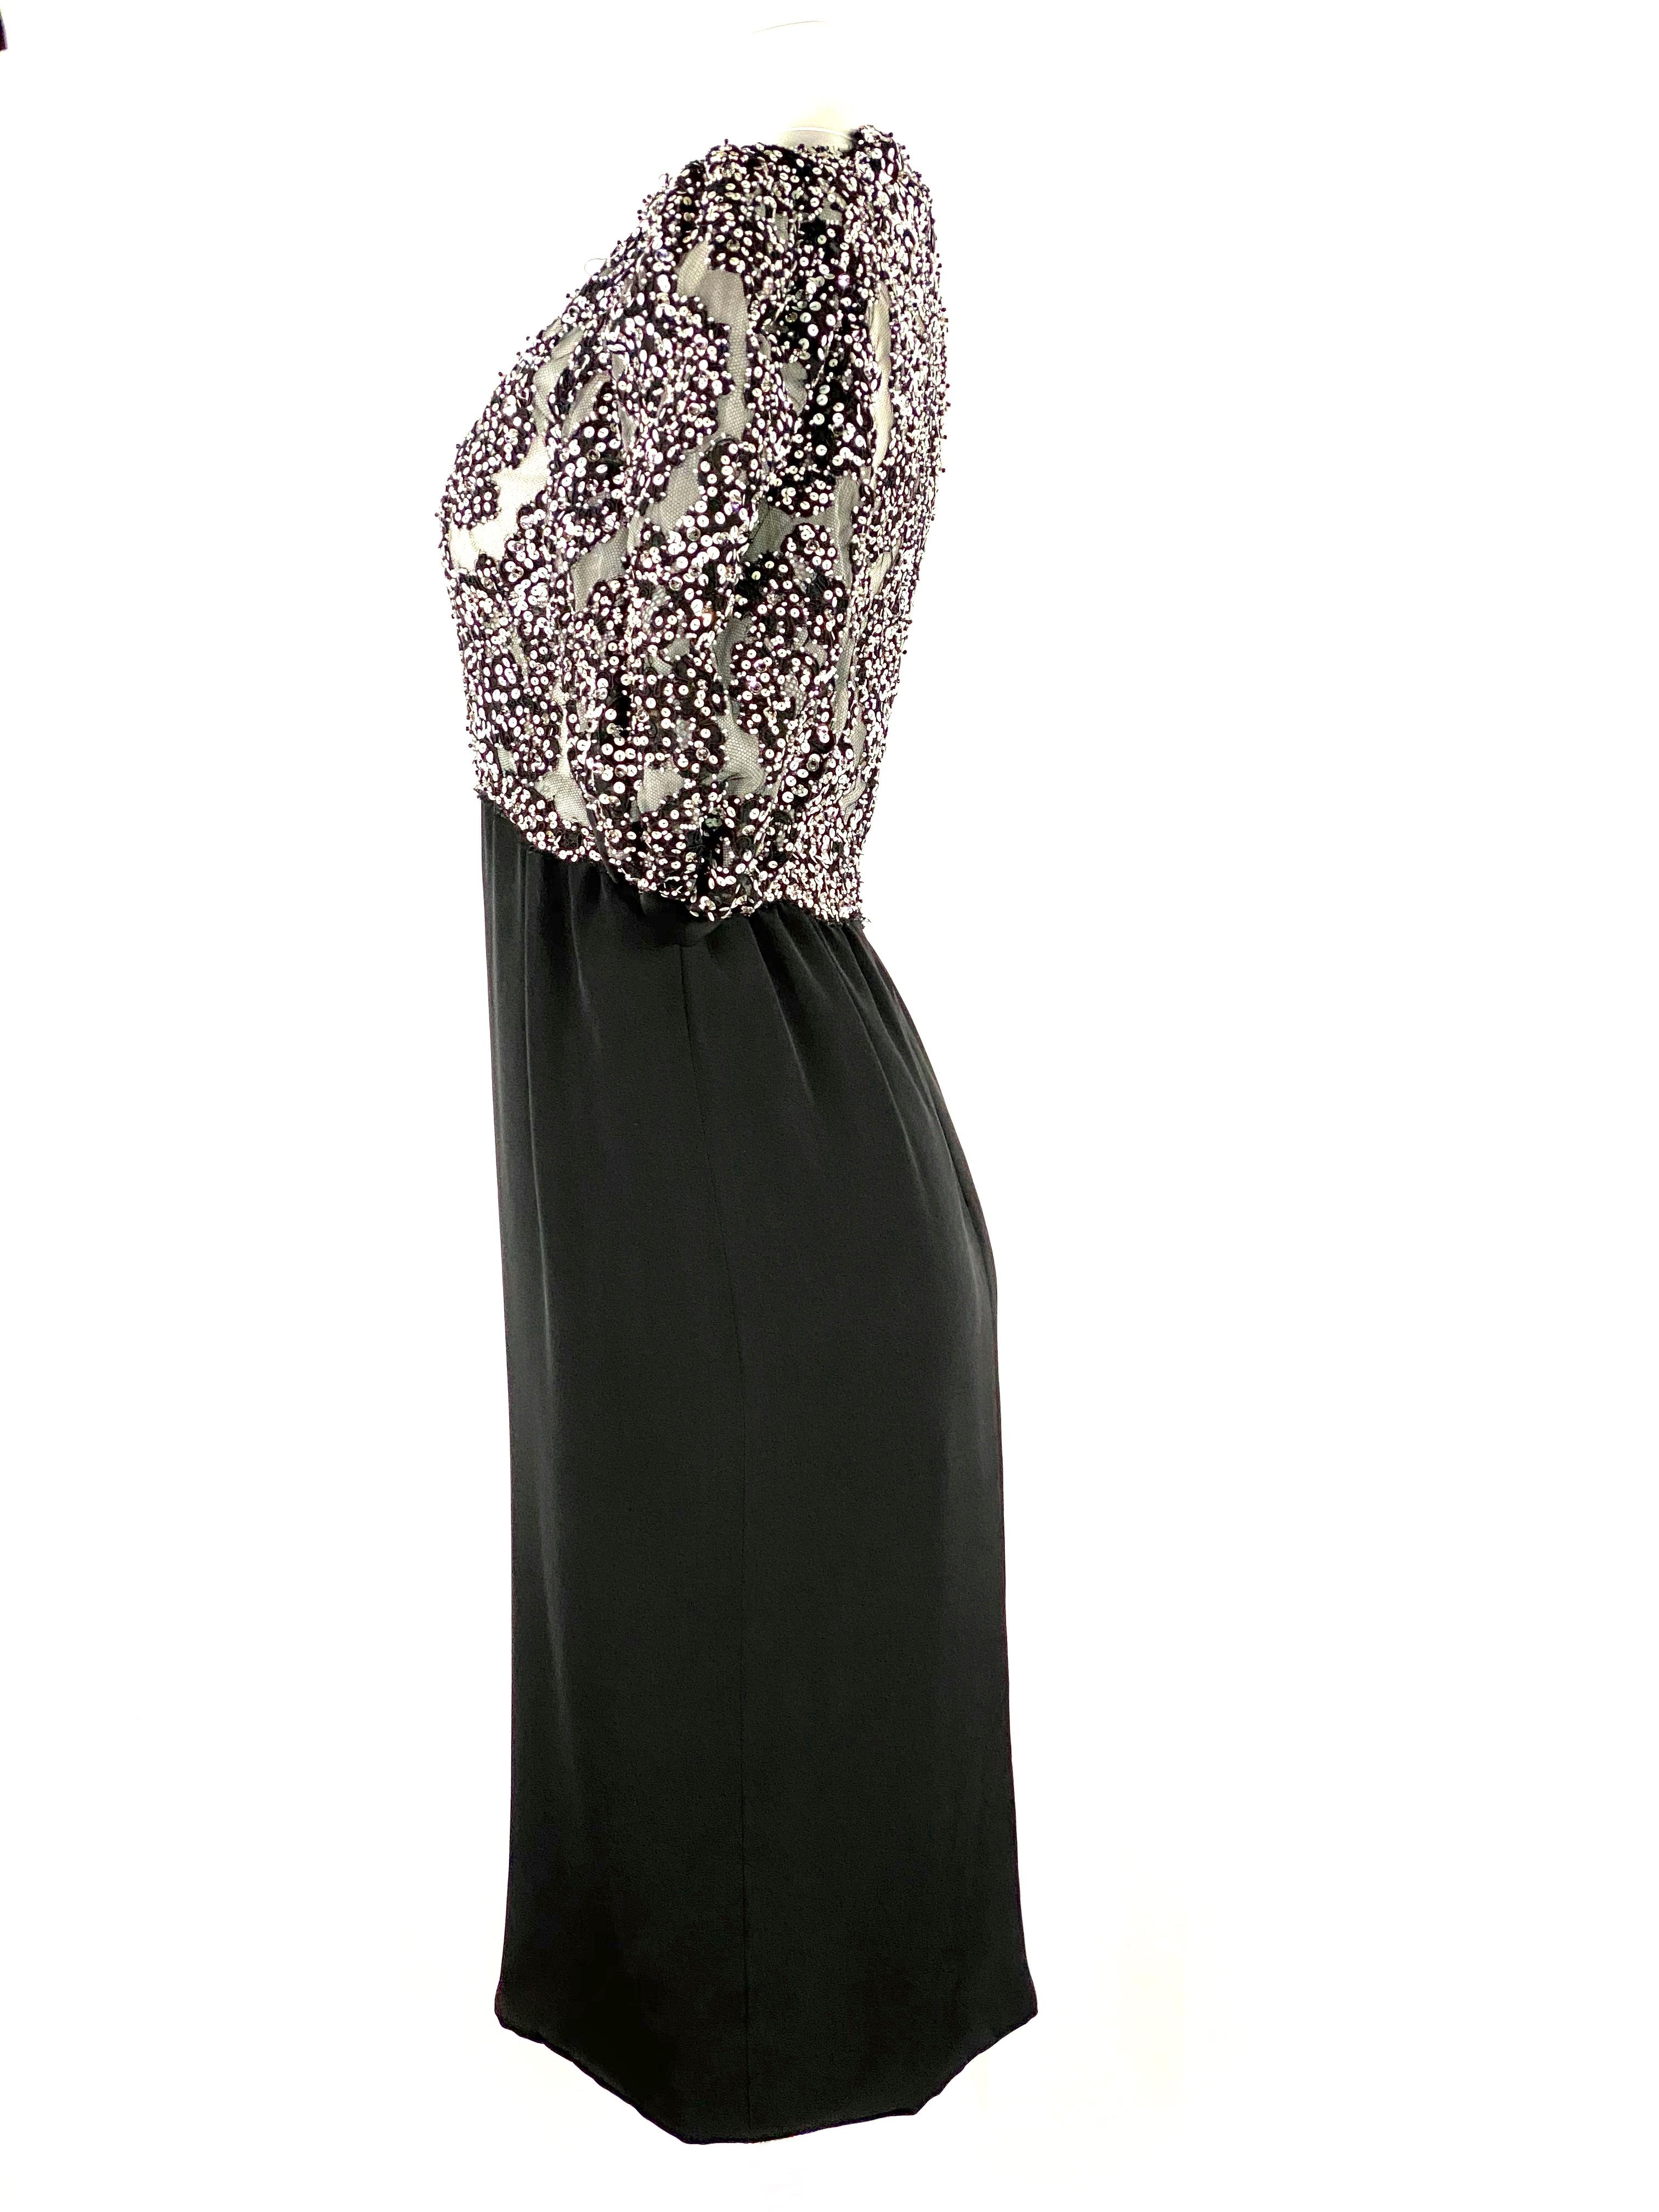 Vintage MICHAEL NOVARESE Black and White Sequin Silk Evening Dress Size Small For Sale 1